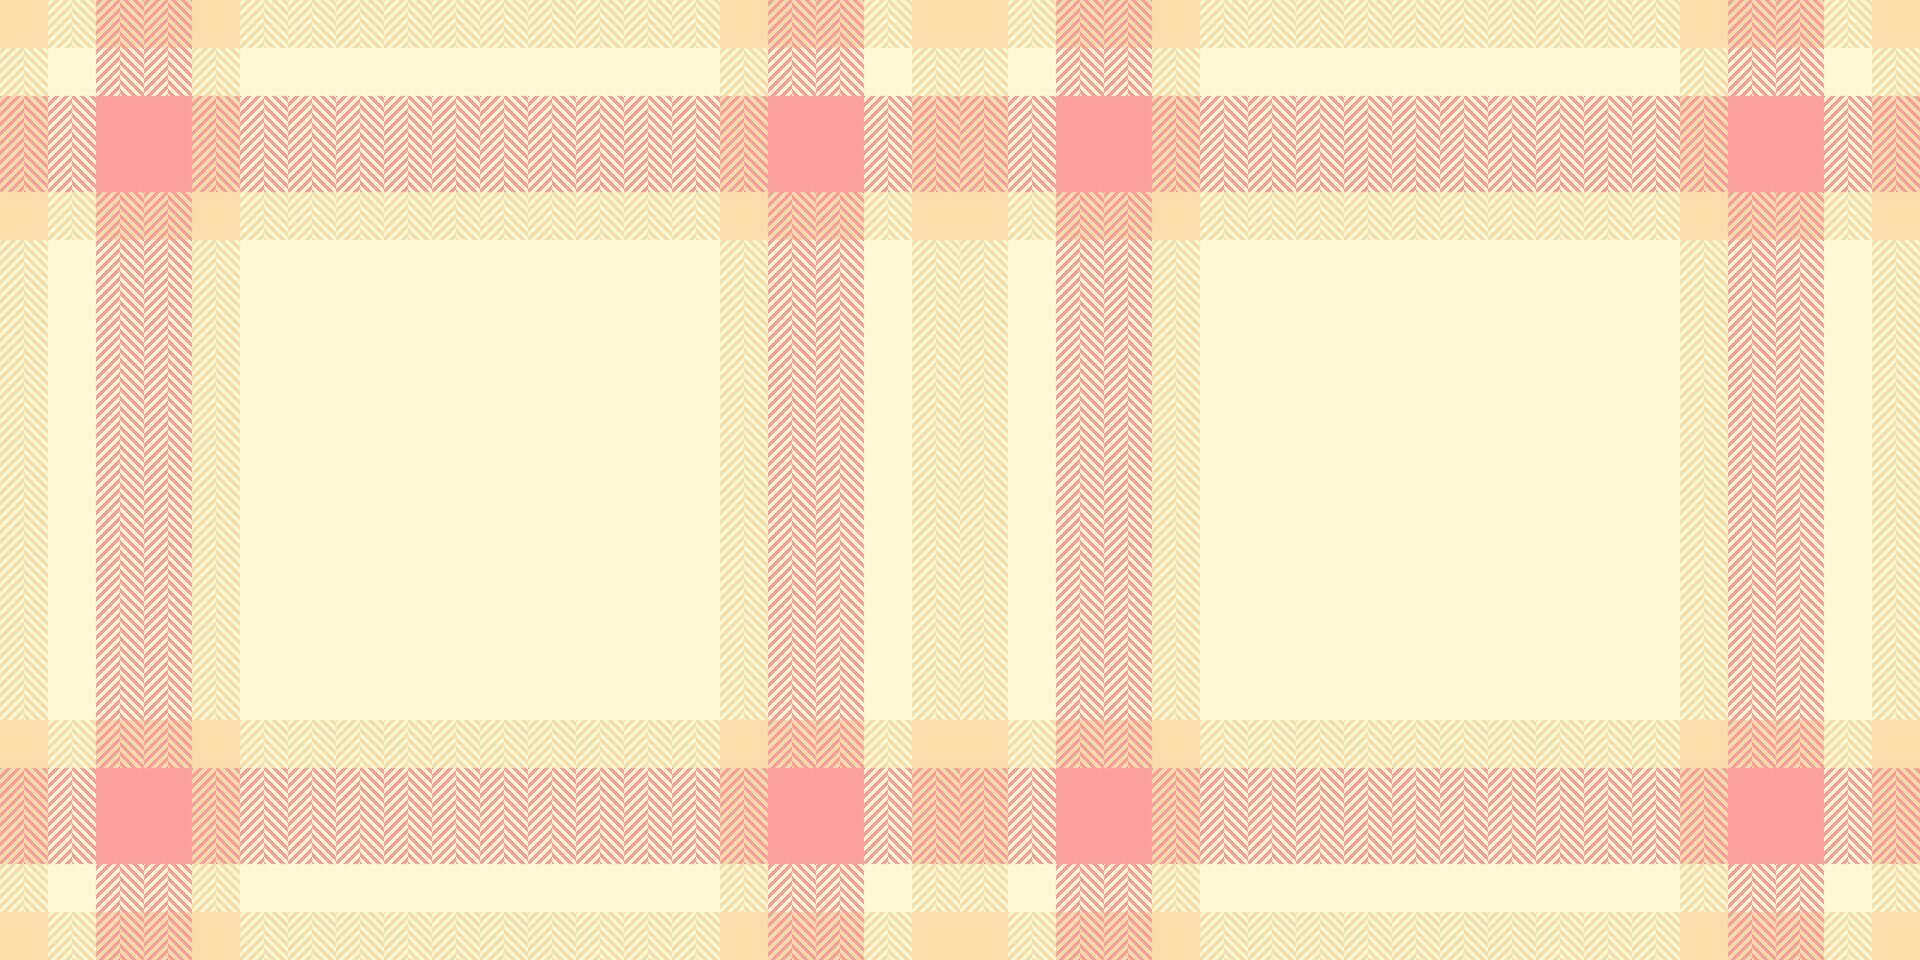 Dining check background plaid, direct tartan seamless texture. Classic vector pattern fabric textile in light goldenrod yellow and navajo white colors.